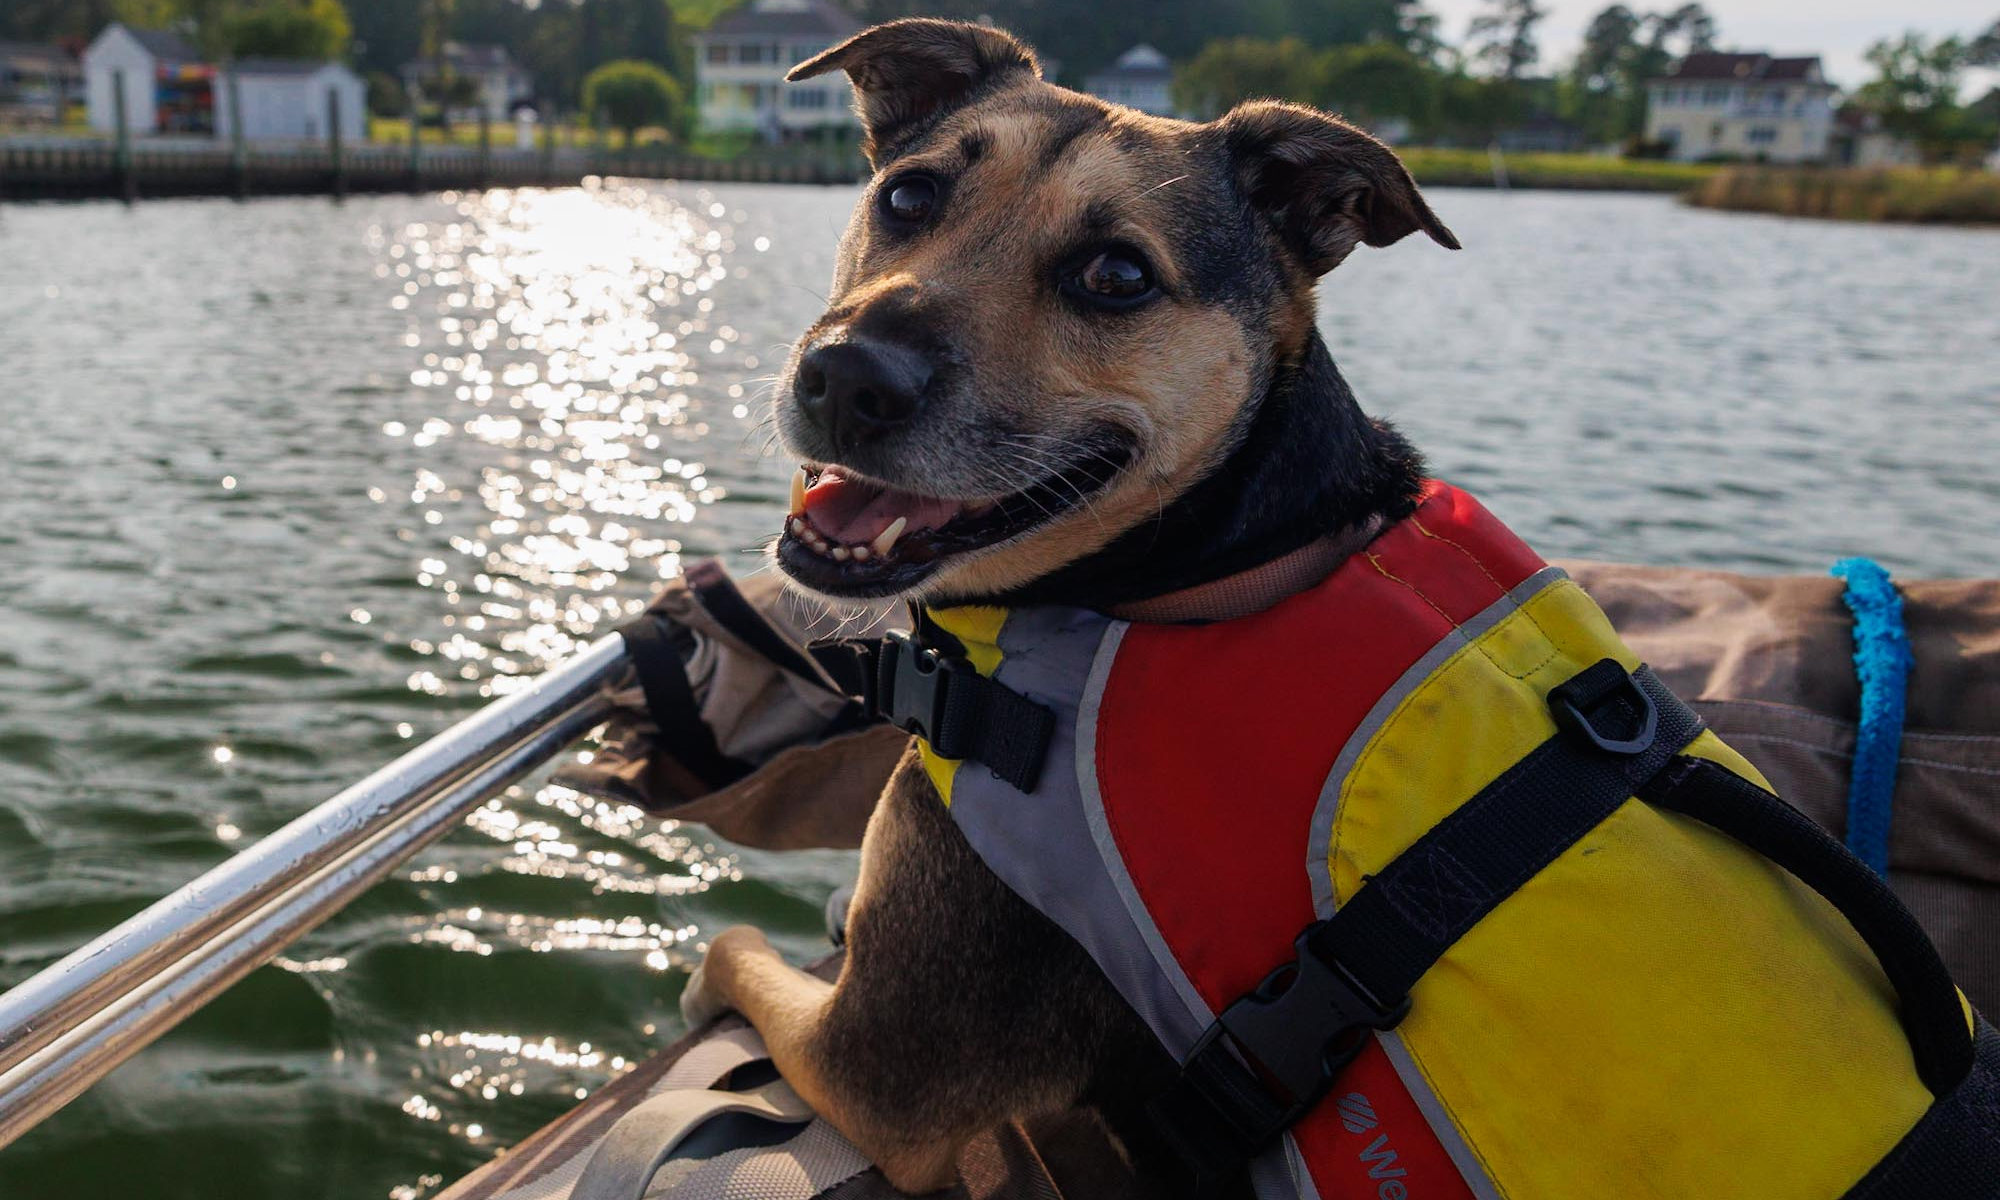 A dog in a life jacket on a boat on the water